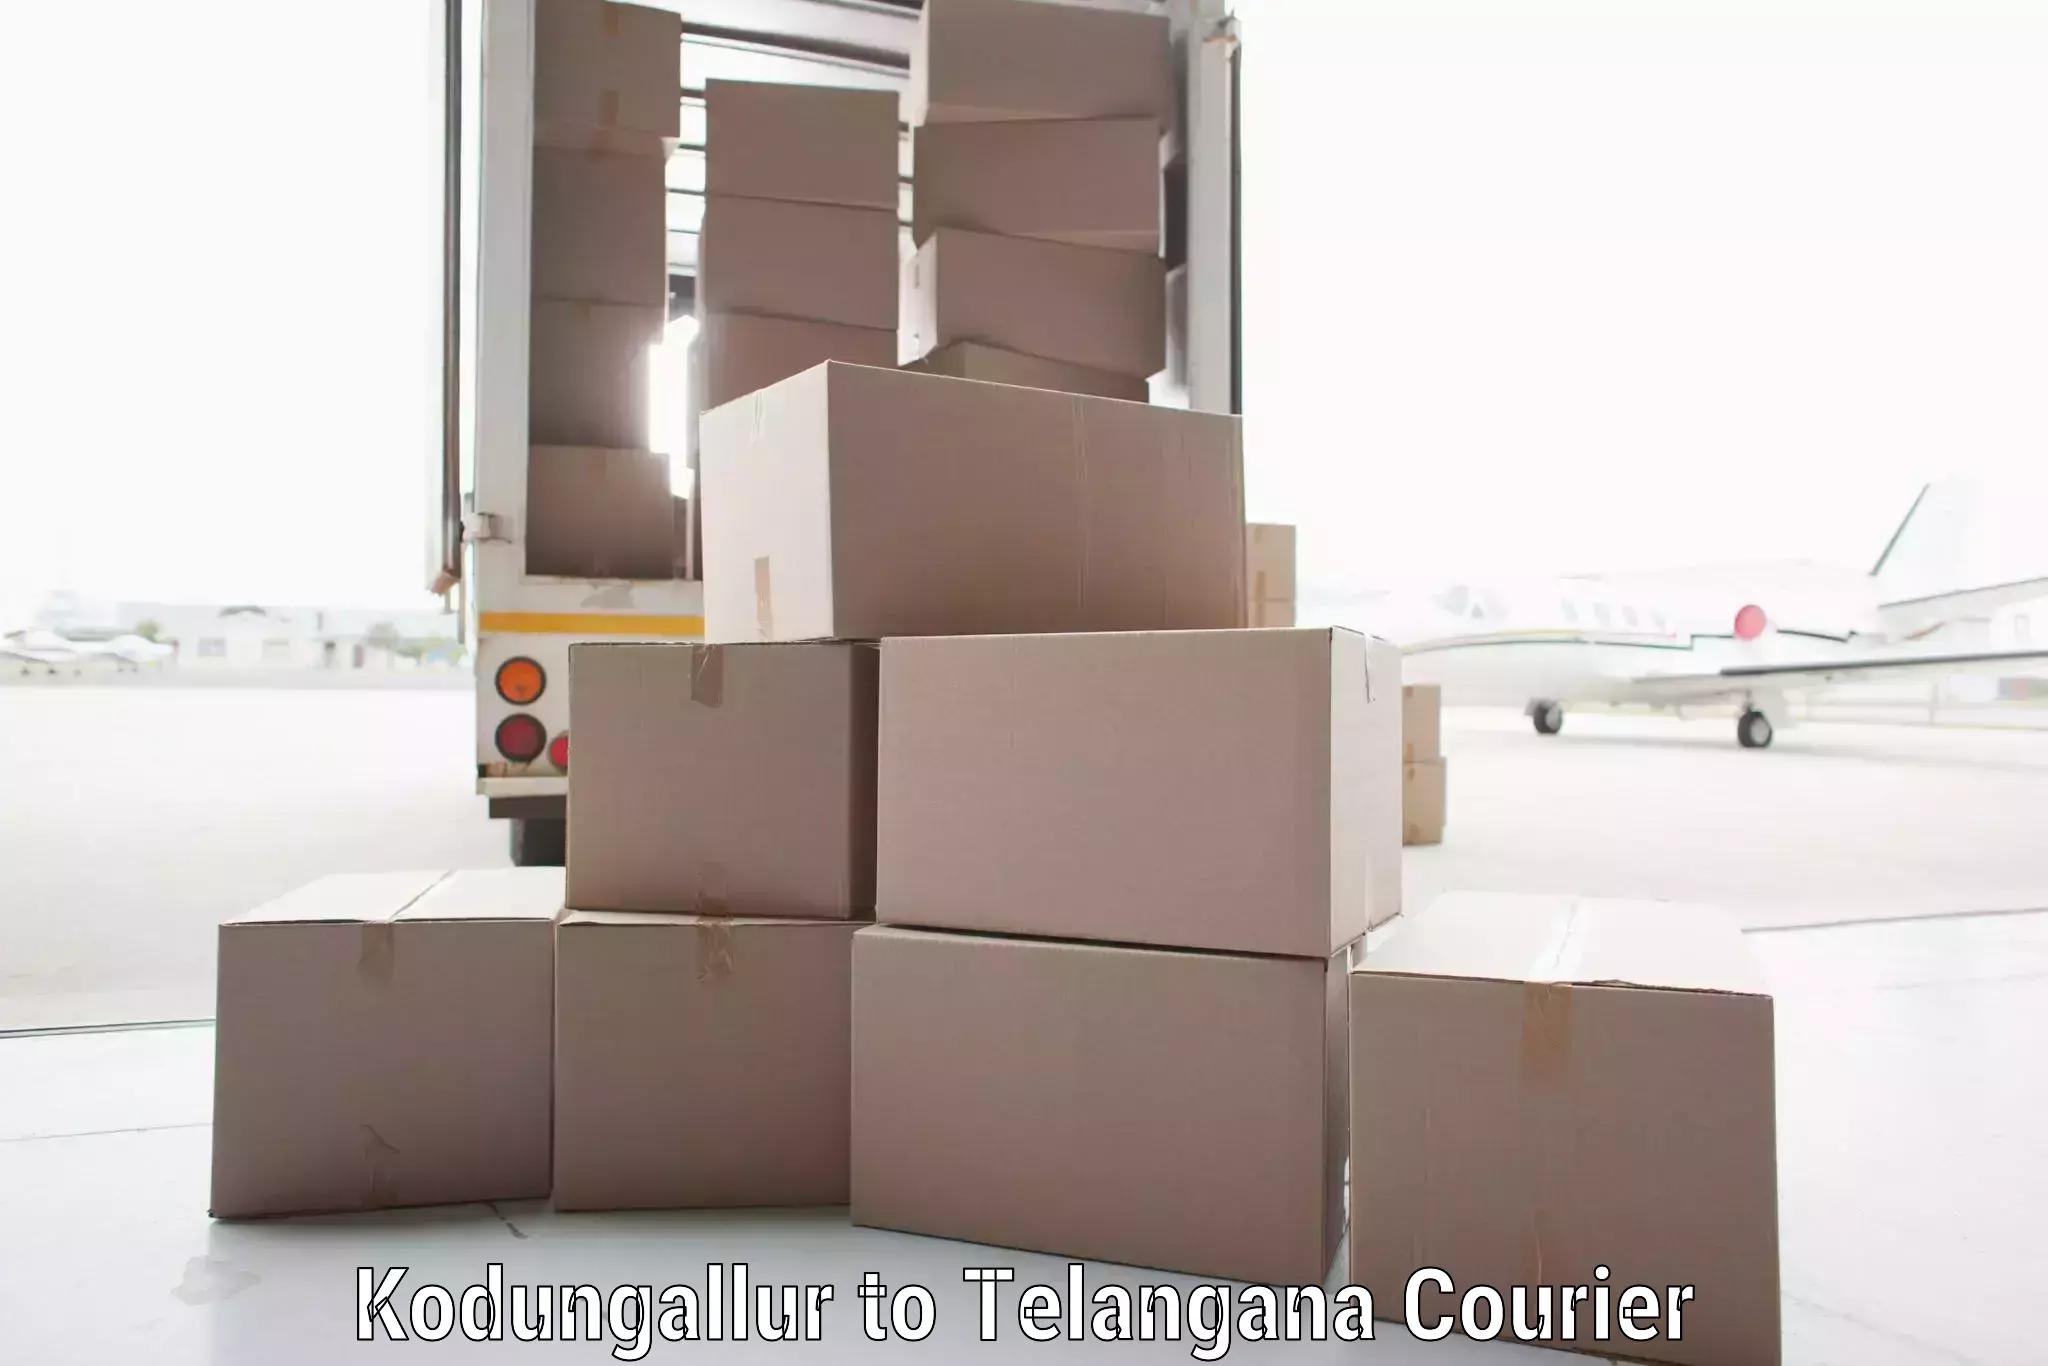 Easy access courier services in Kodungallur to Narayanpet